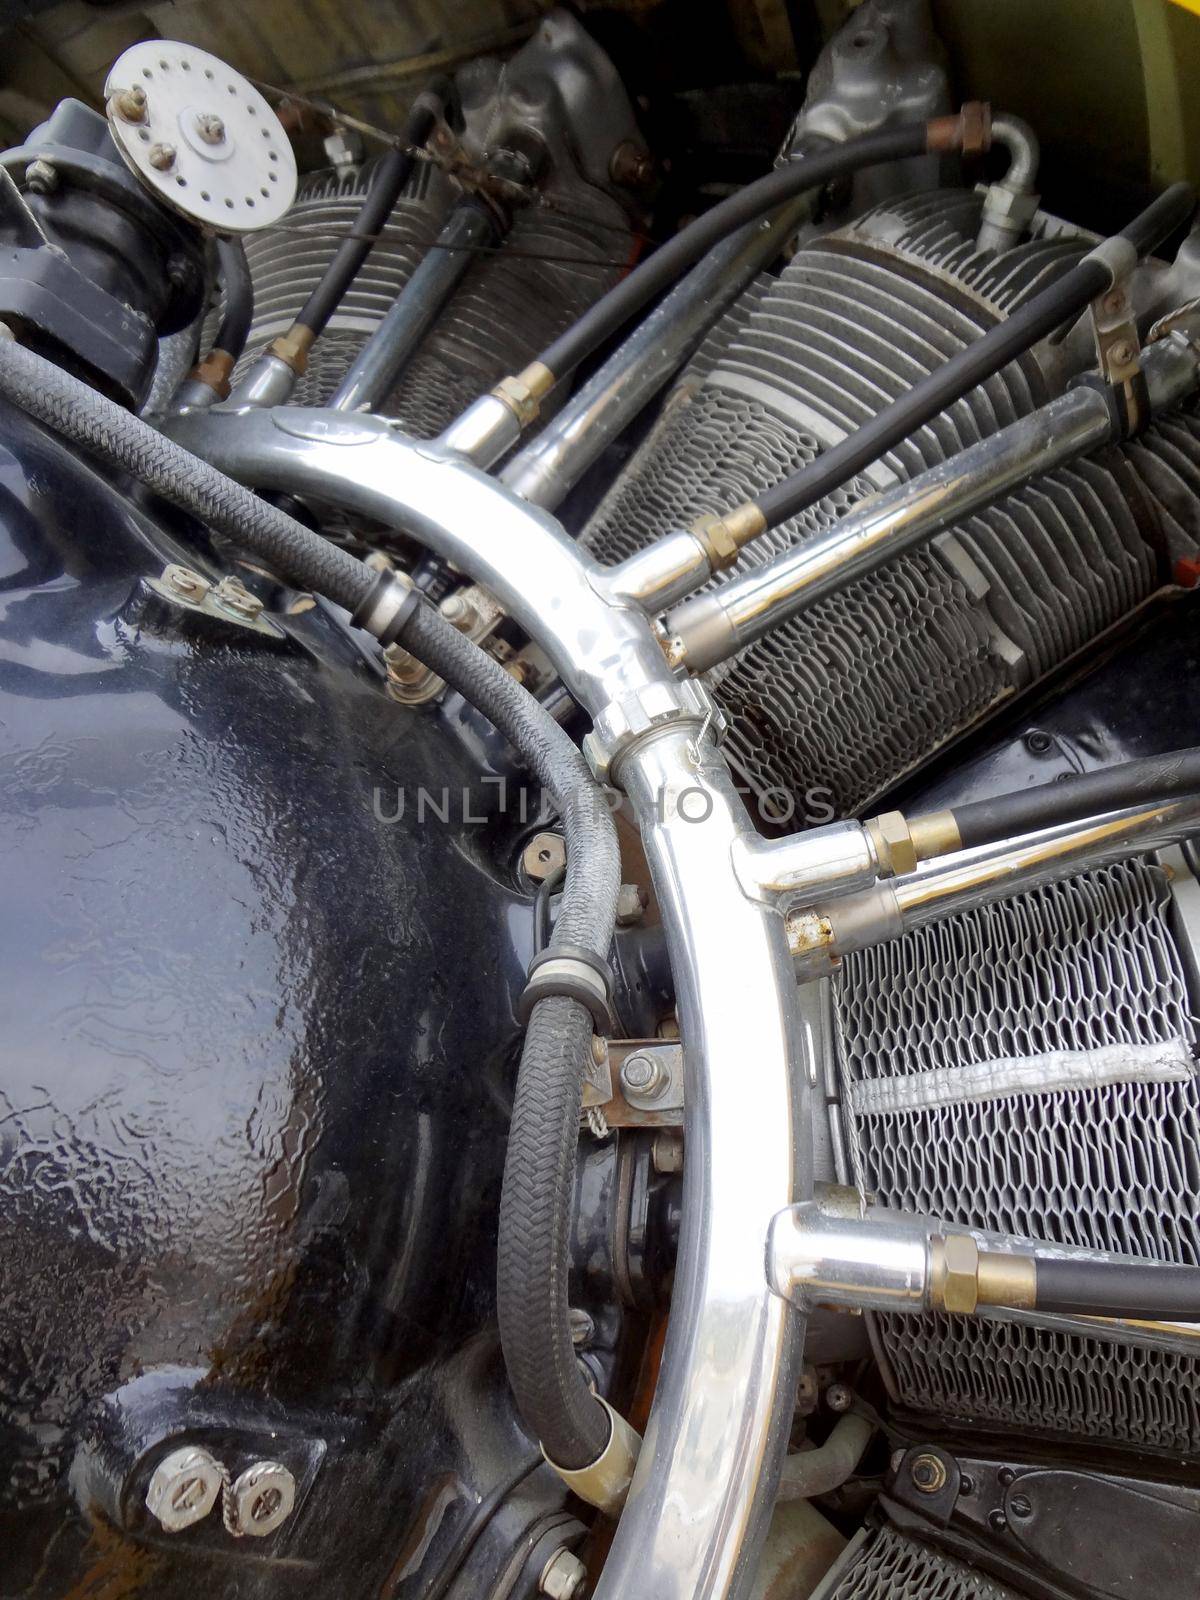 Close up of turbine of a propeller engine and powerful pistons with signs of wear.